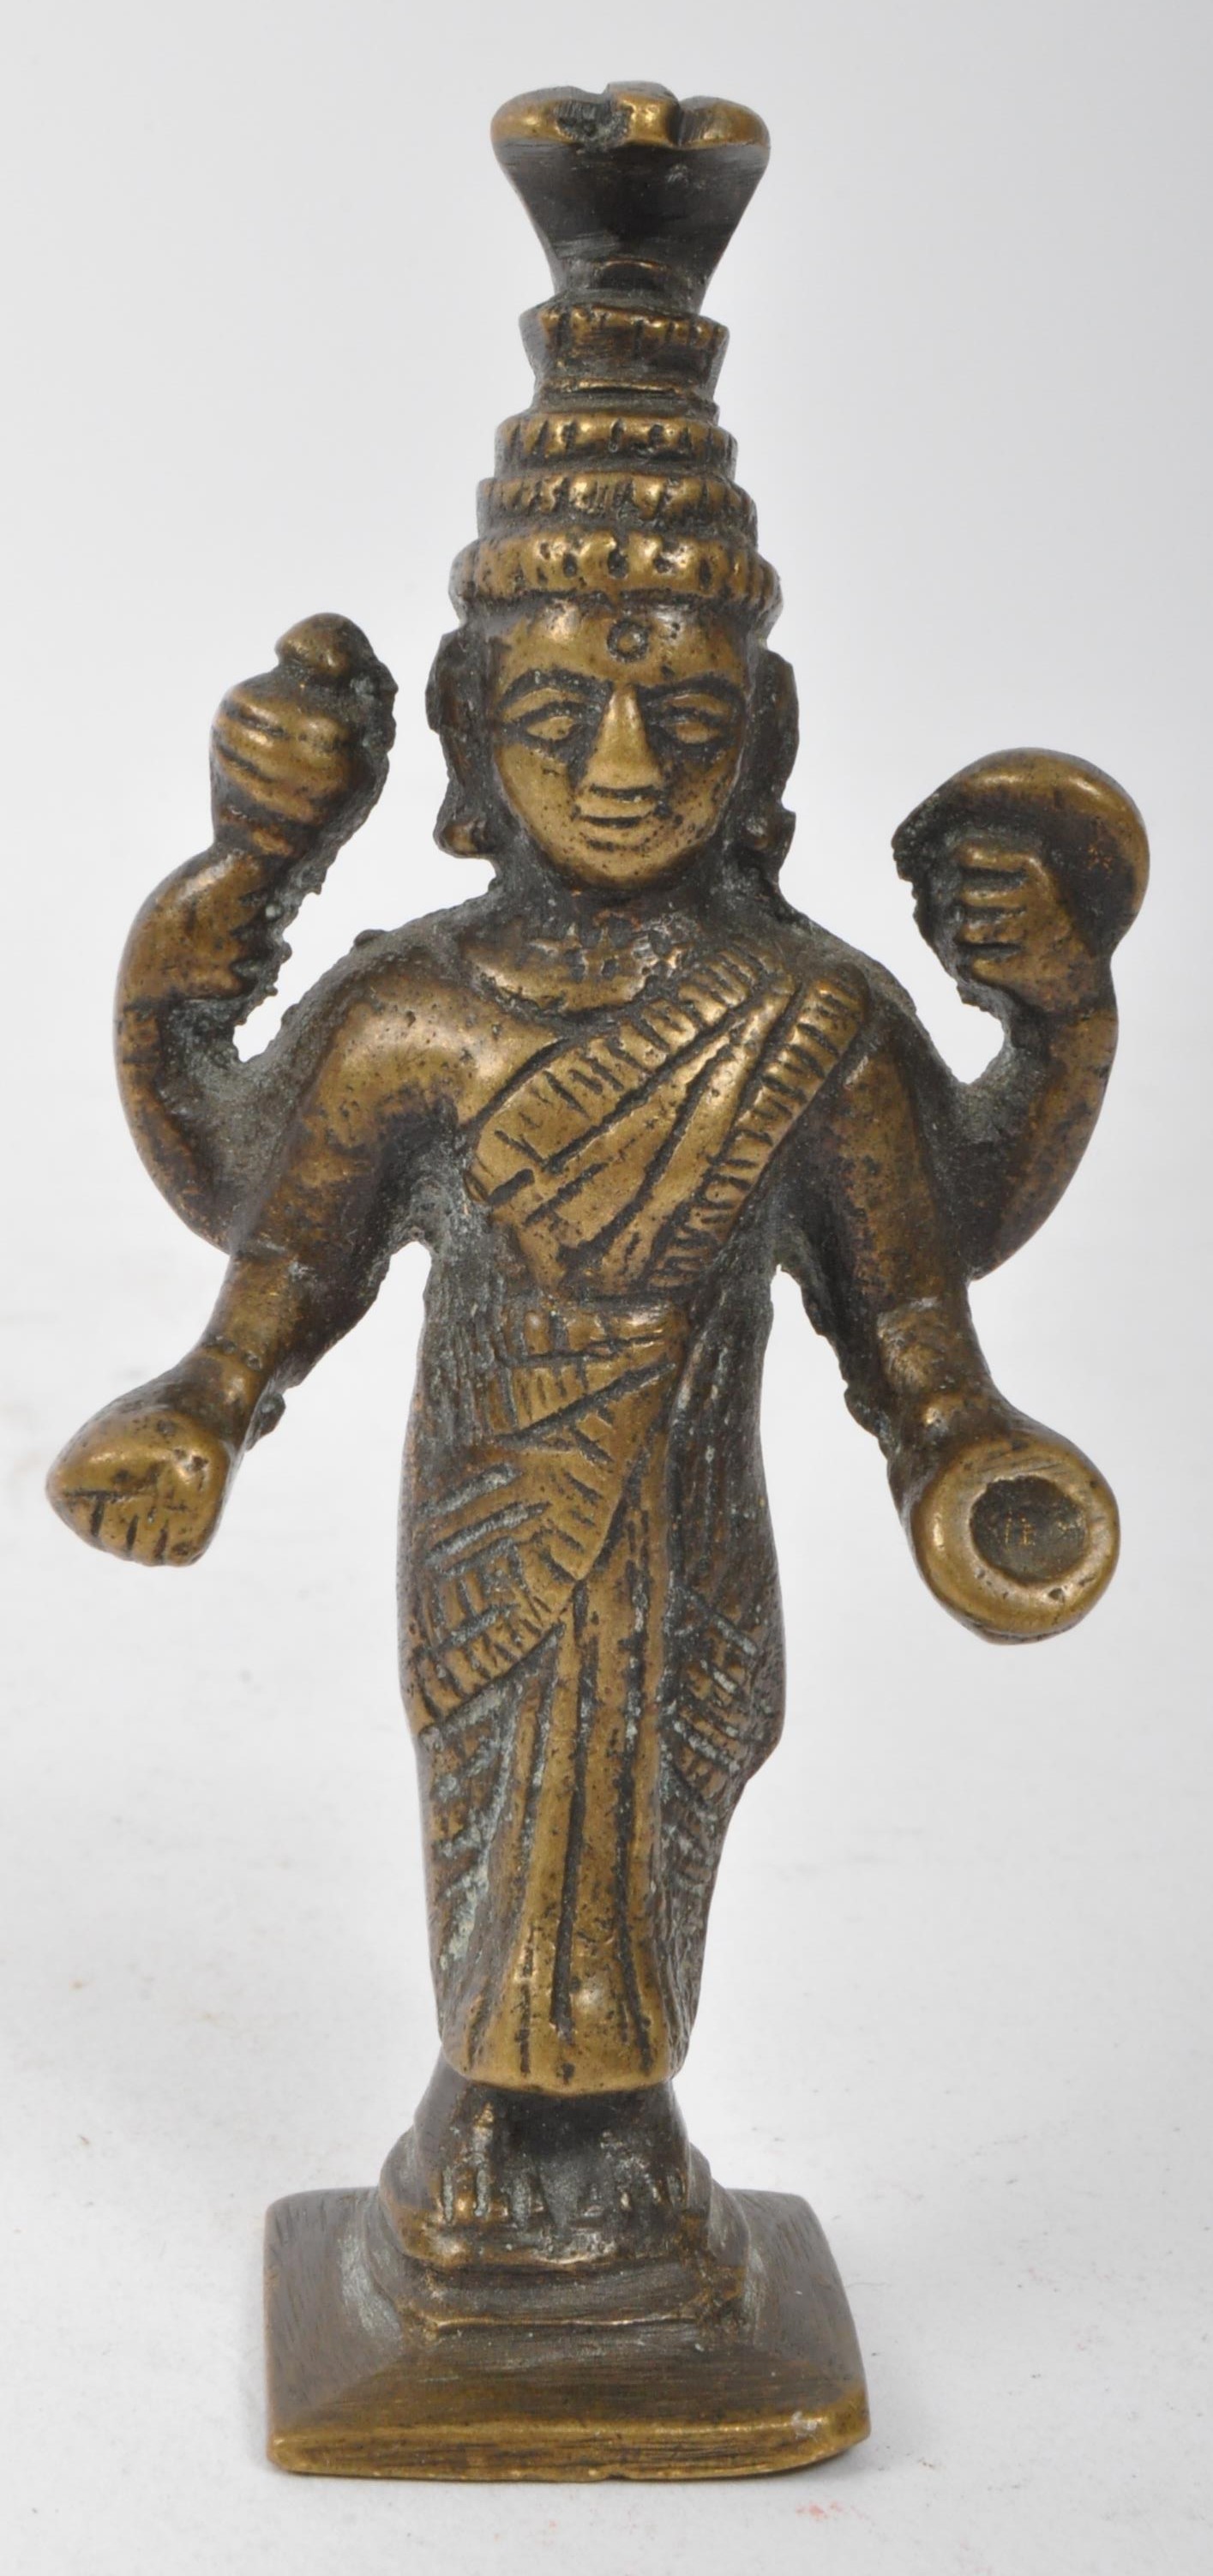 COLLECTION OF INDIAN BRONZE AND BRASS DEITY FIGURES - Image 6 of 6